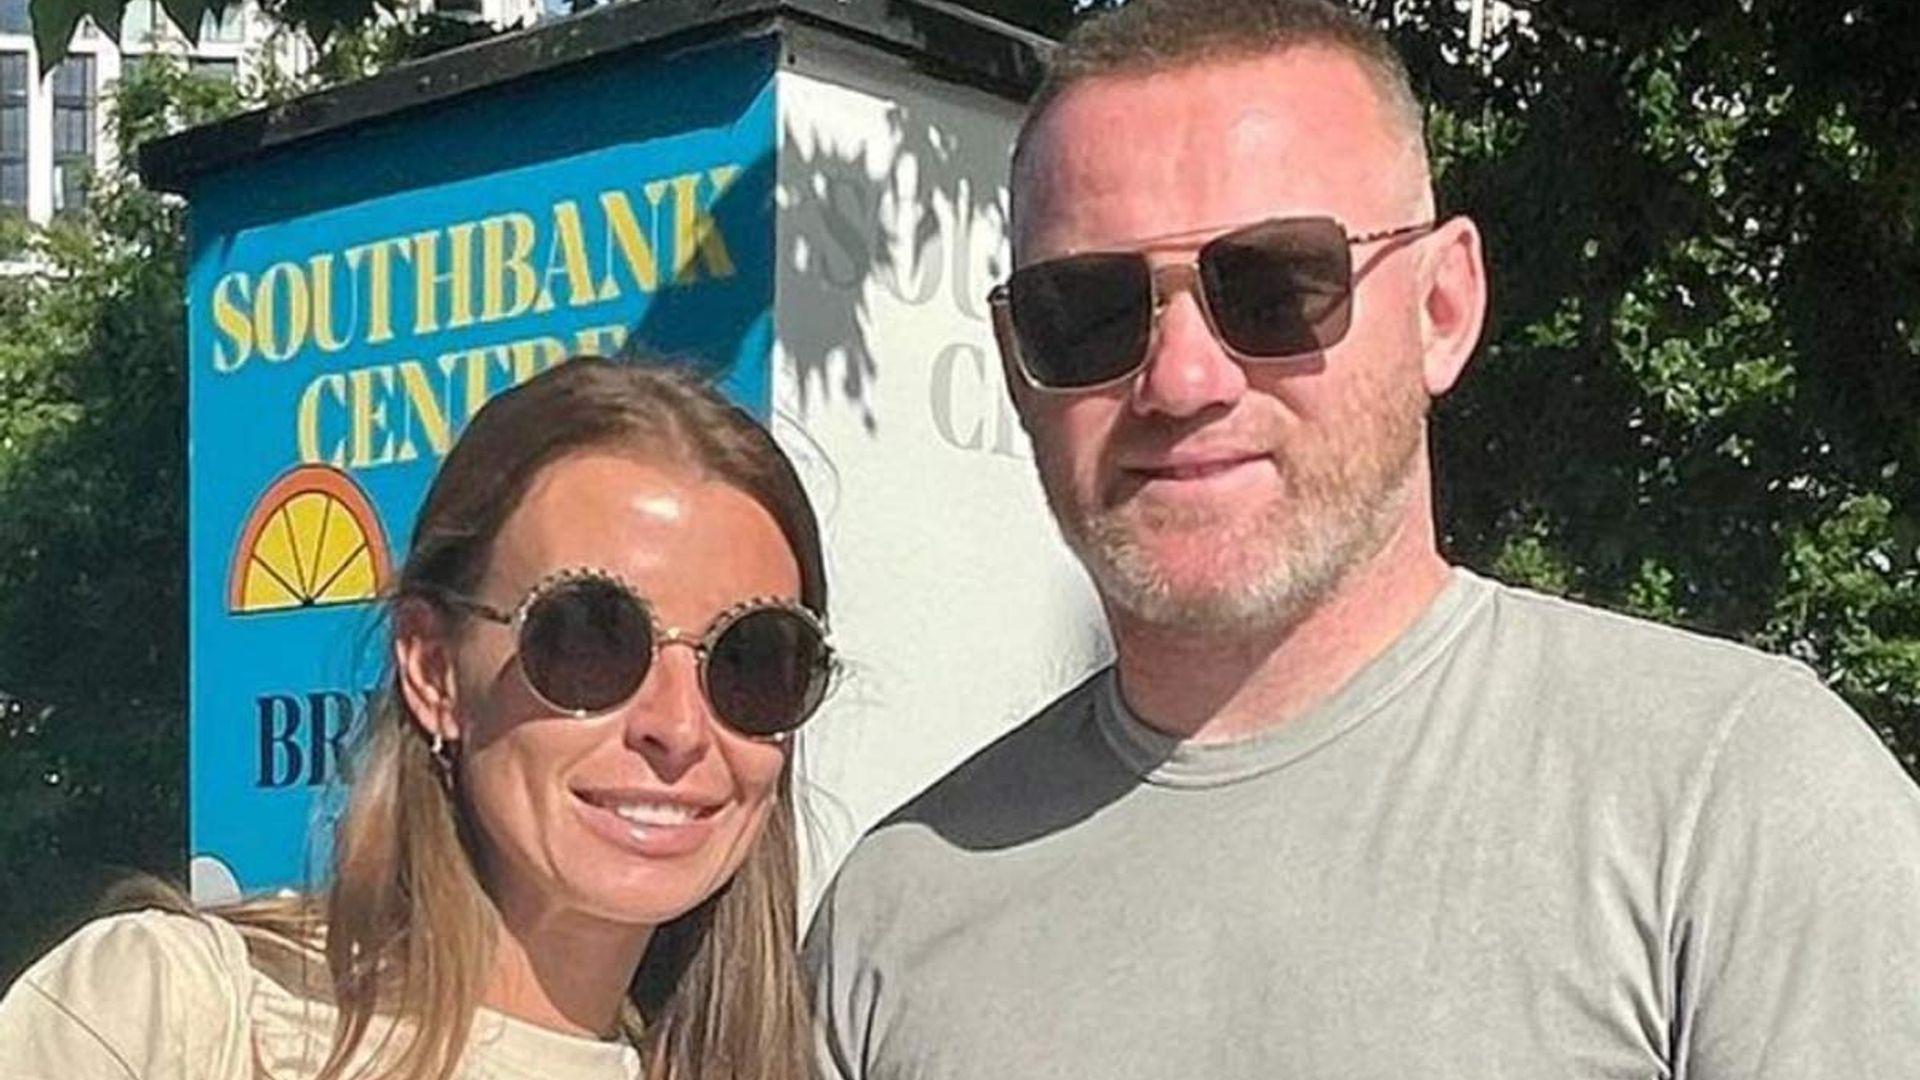 Coleen Rooney posts heartwarming family photo with her and Wayne's four sons - fans can't get enough